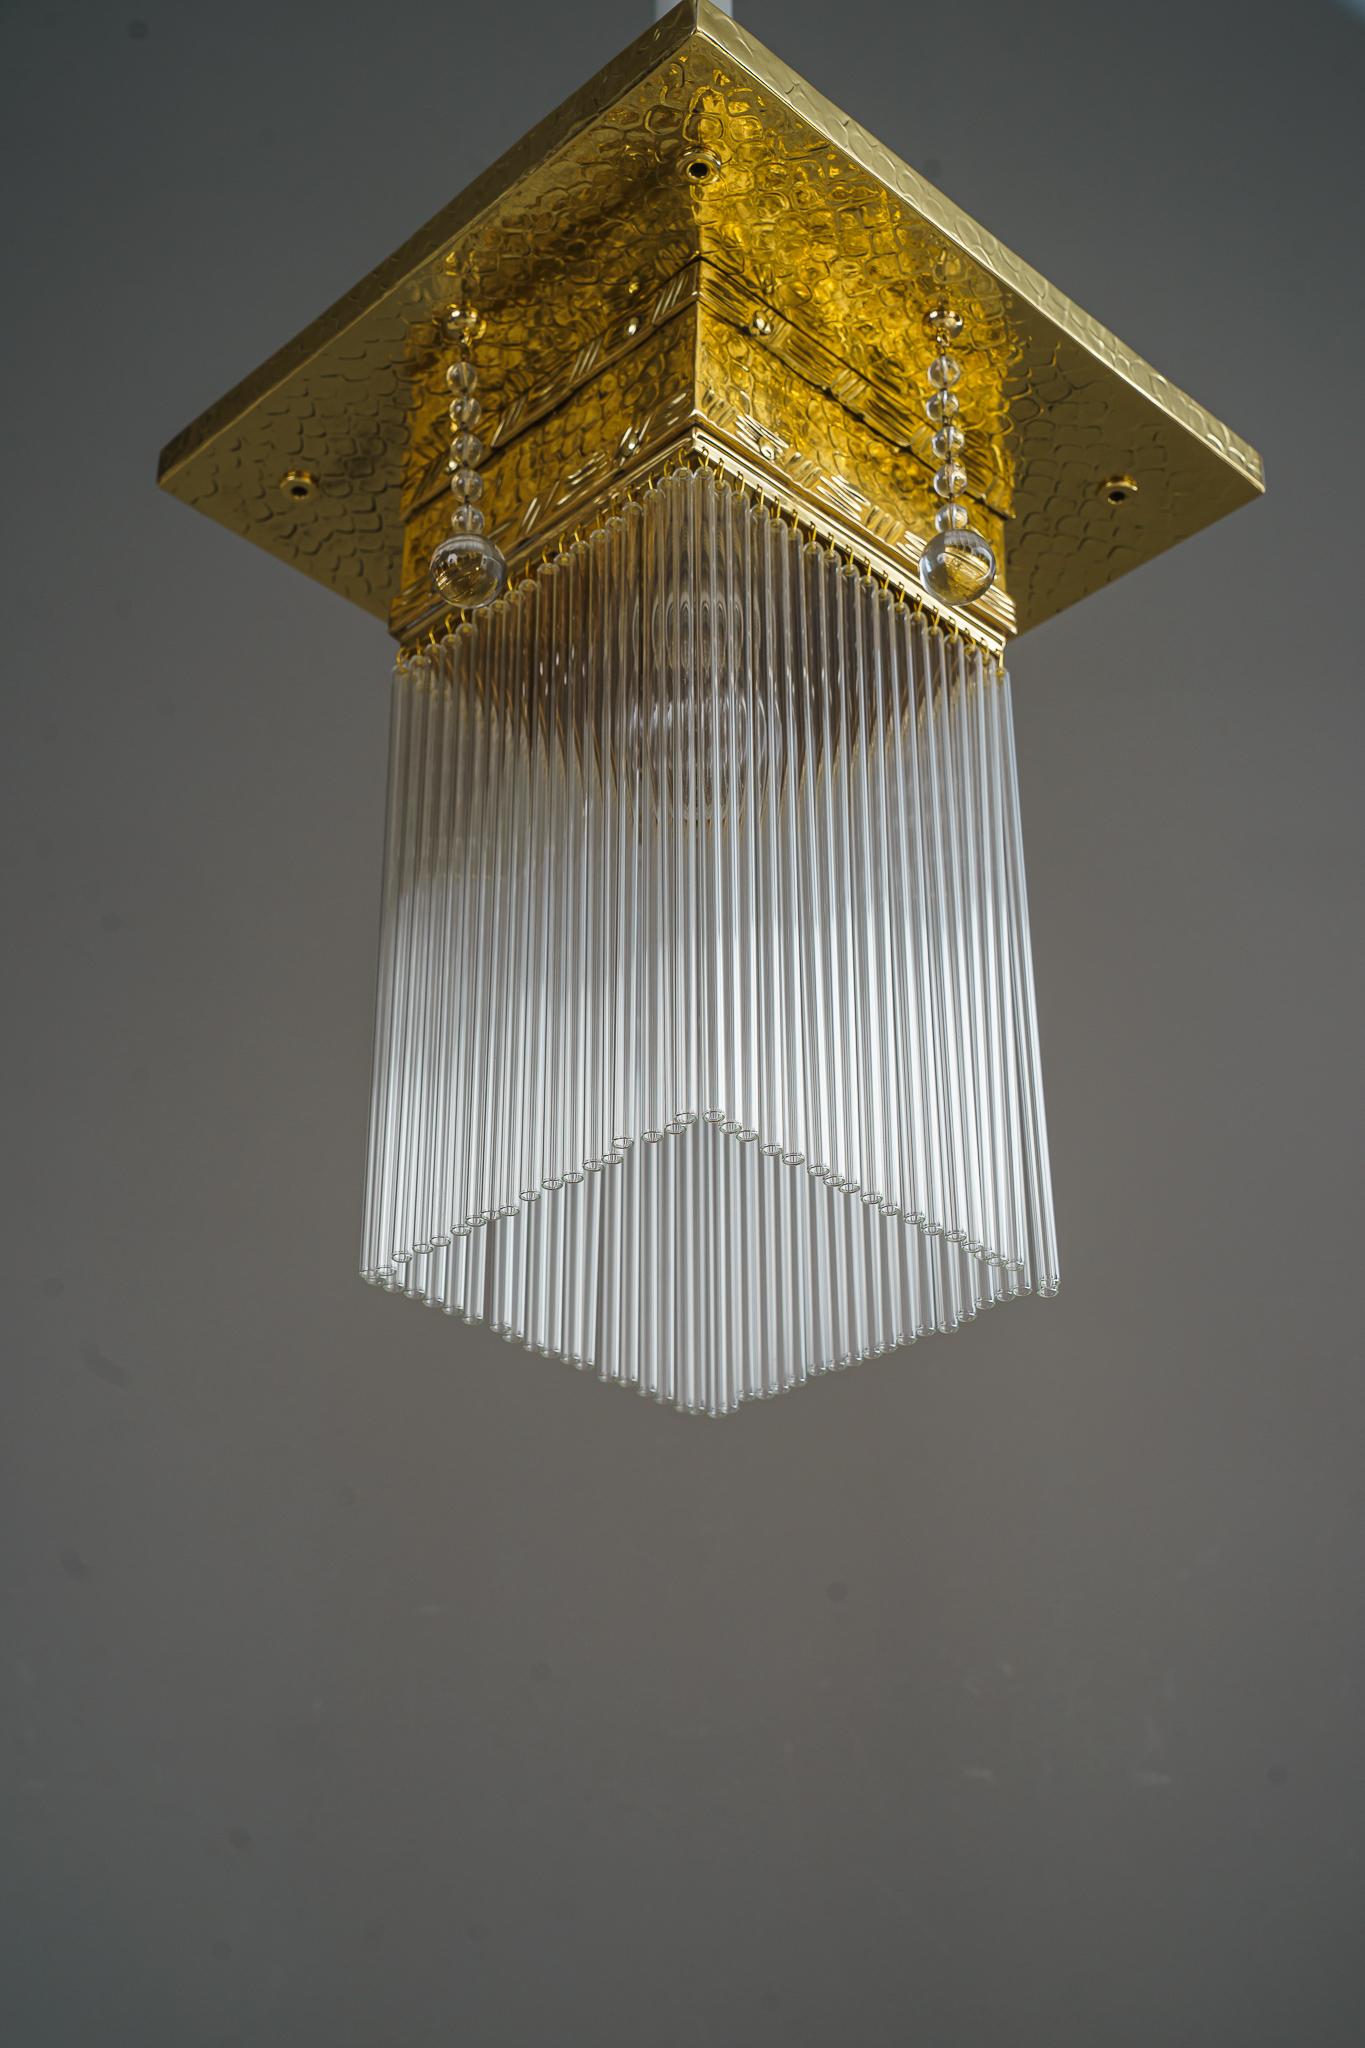 Hammered ceiling lamp with glass sticks vienna around 1920 
Brass polished and stove enameled
Glass sticks are replaced ( new )